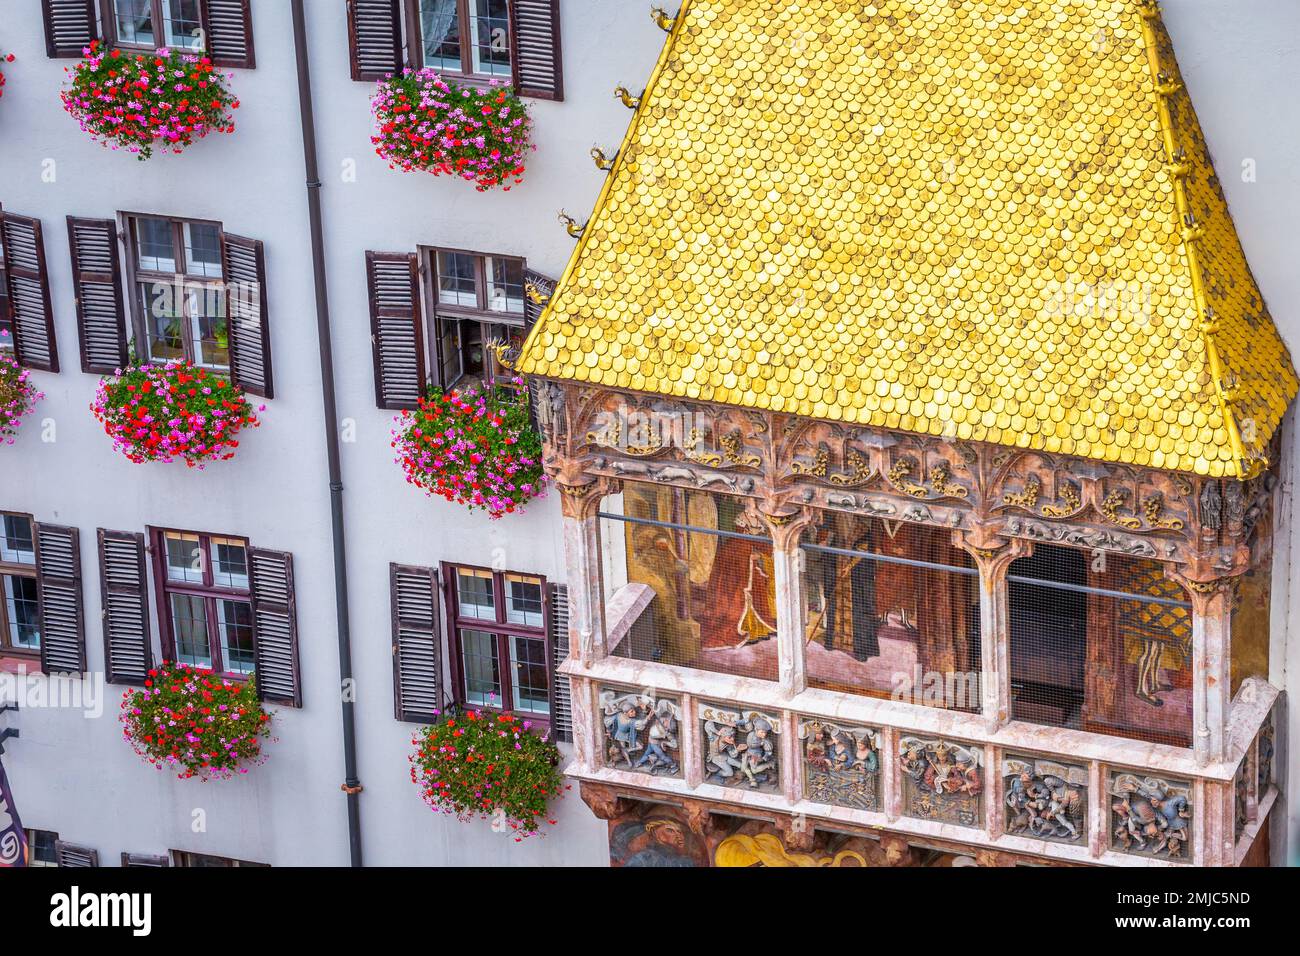 Close-up of the ornate golden roof in Innsbruck at springtime, Austria Stock Photo